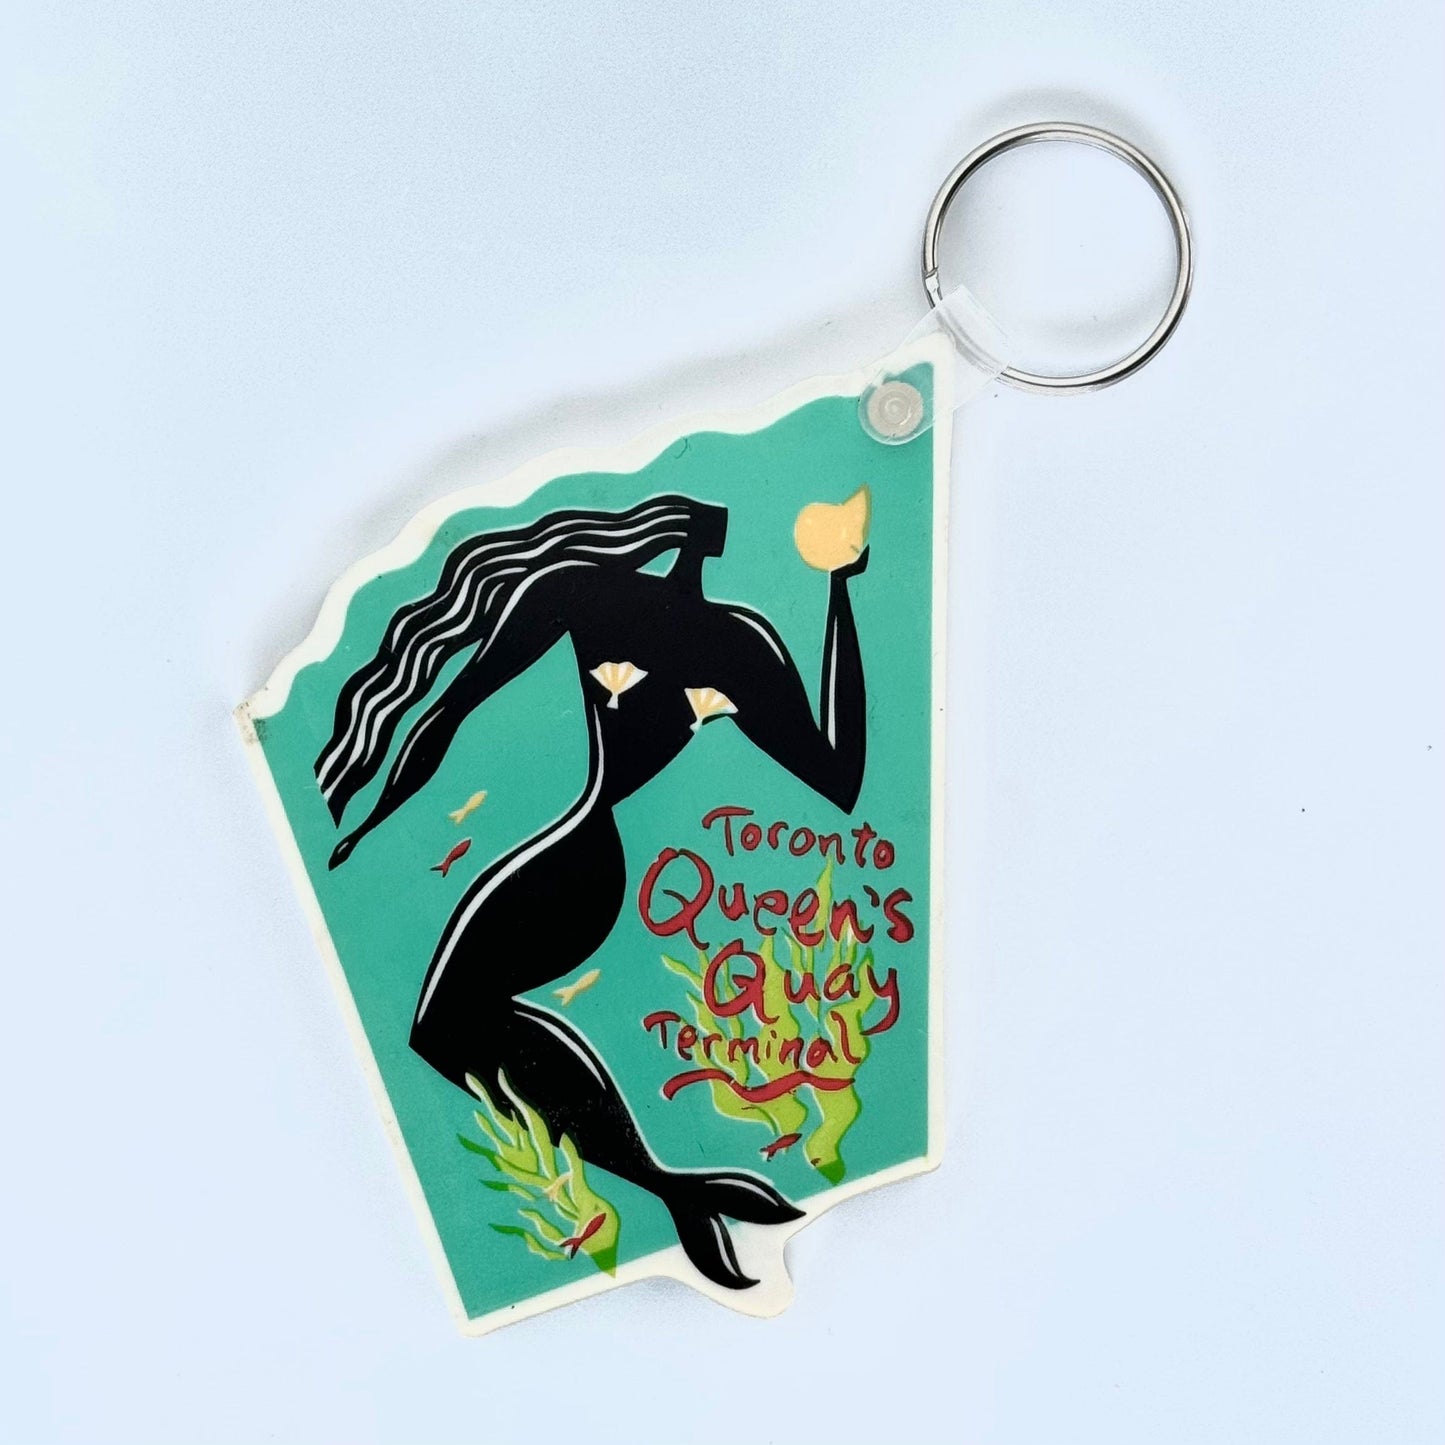 Vintage ’Toronto Queen’s Quay Terminal’ Keychain Key Ring Large Rubber